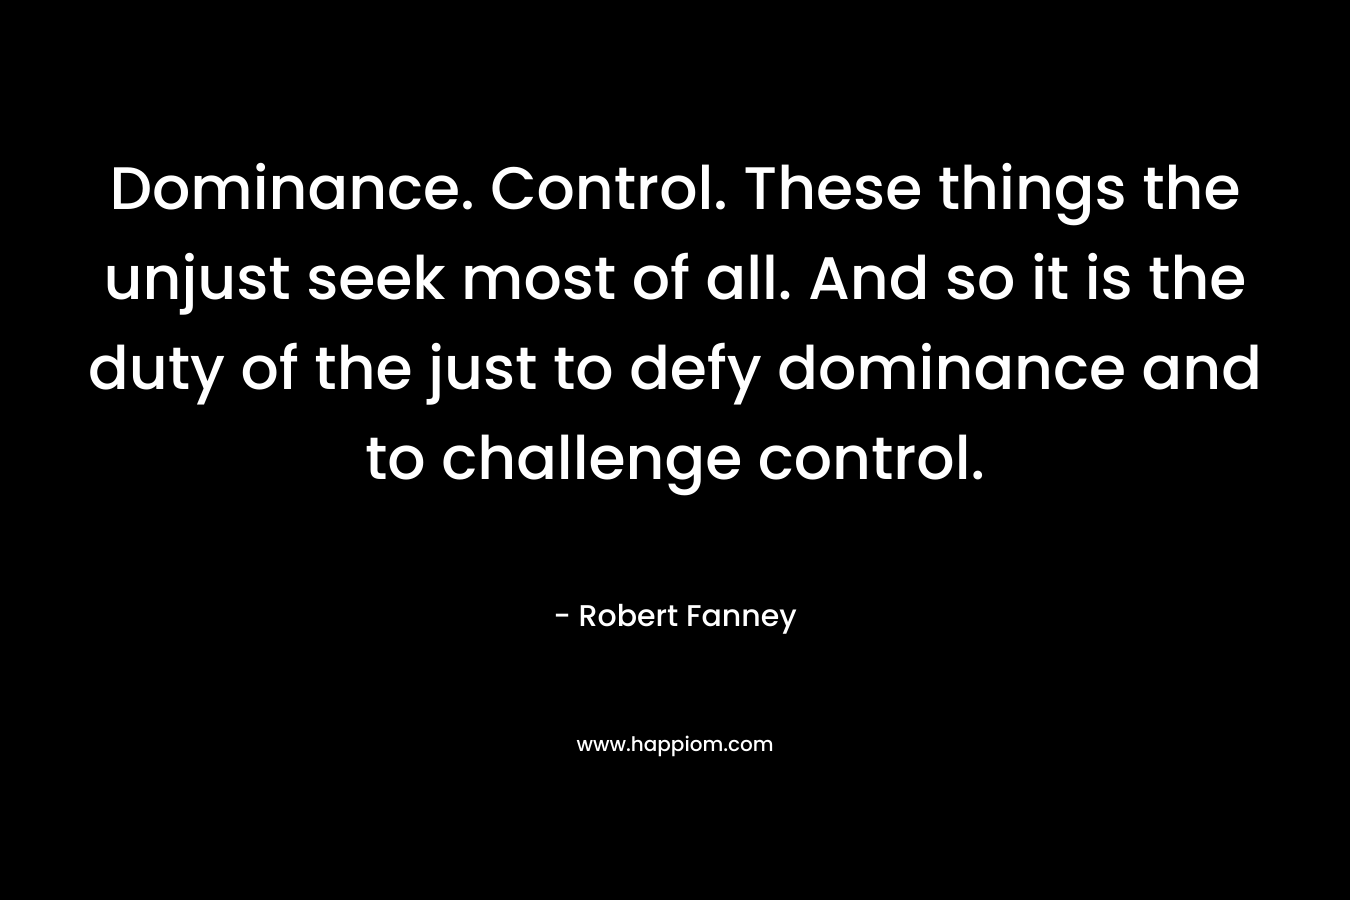 Dominance. Control. These things the unjust seek most of all. And so it is the duty of the just to defy dominance and to challenge control.